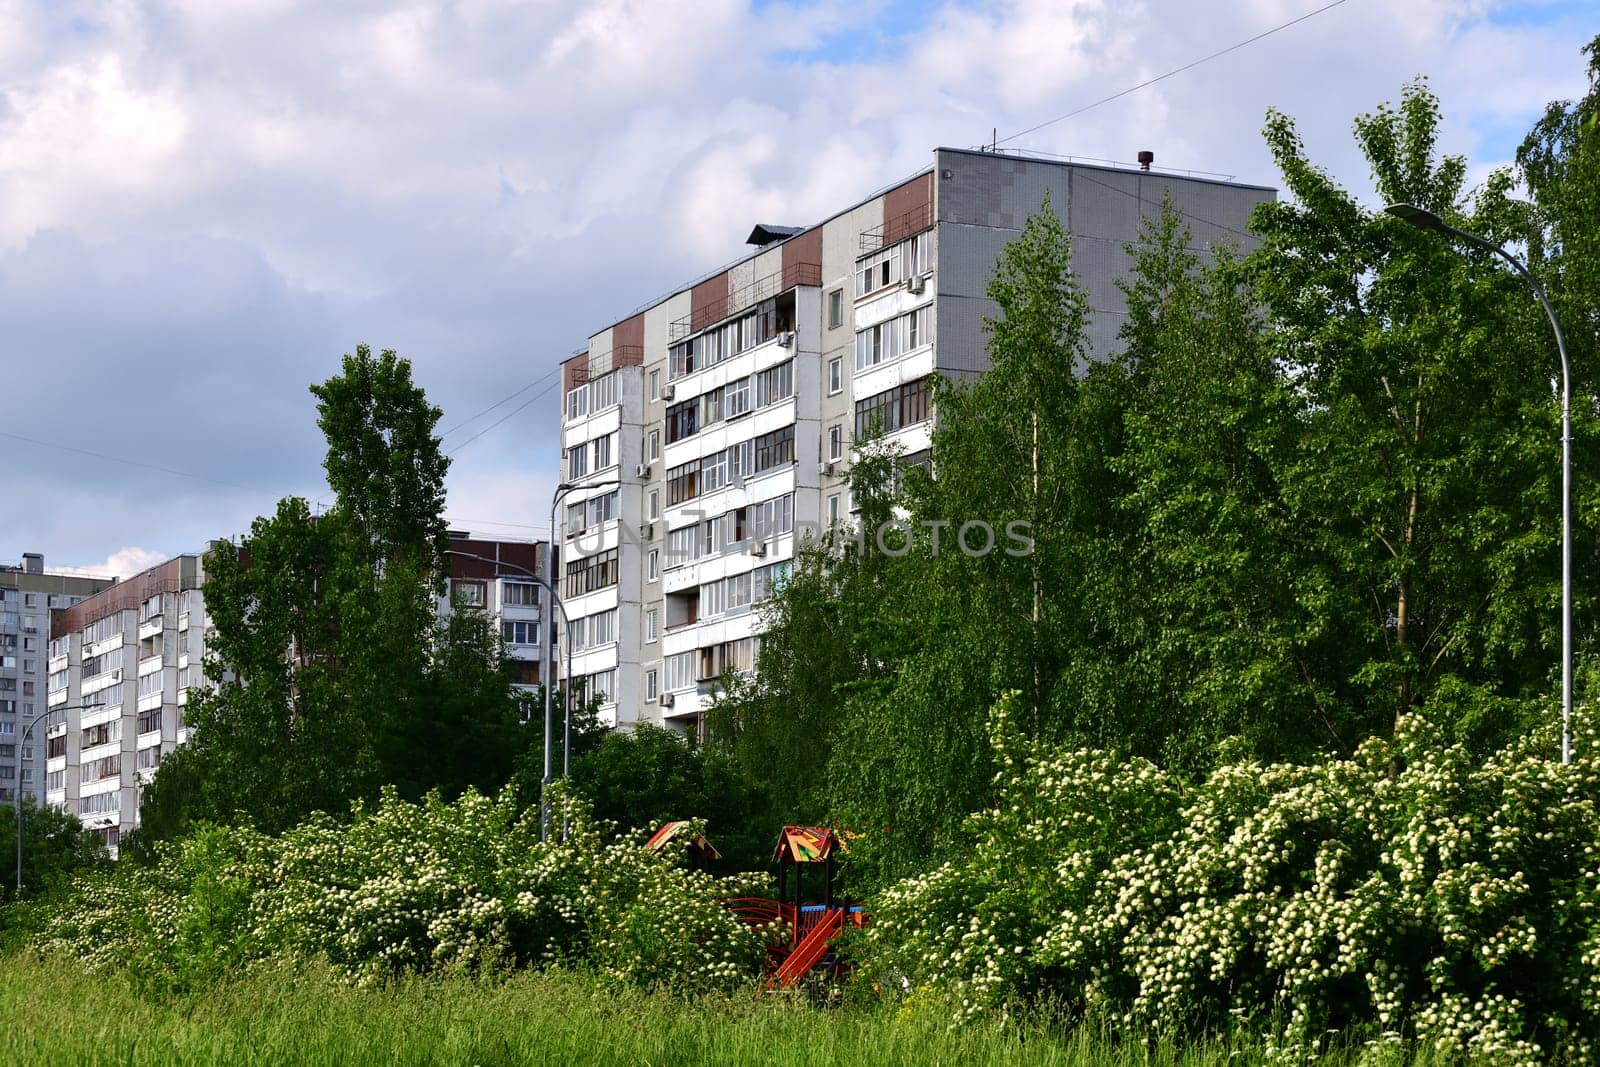 City houses surrounded by trees in Moscow, Russia by olgavolodina